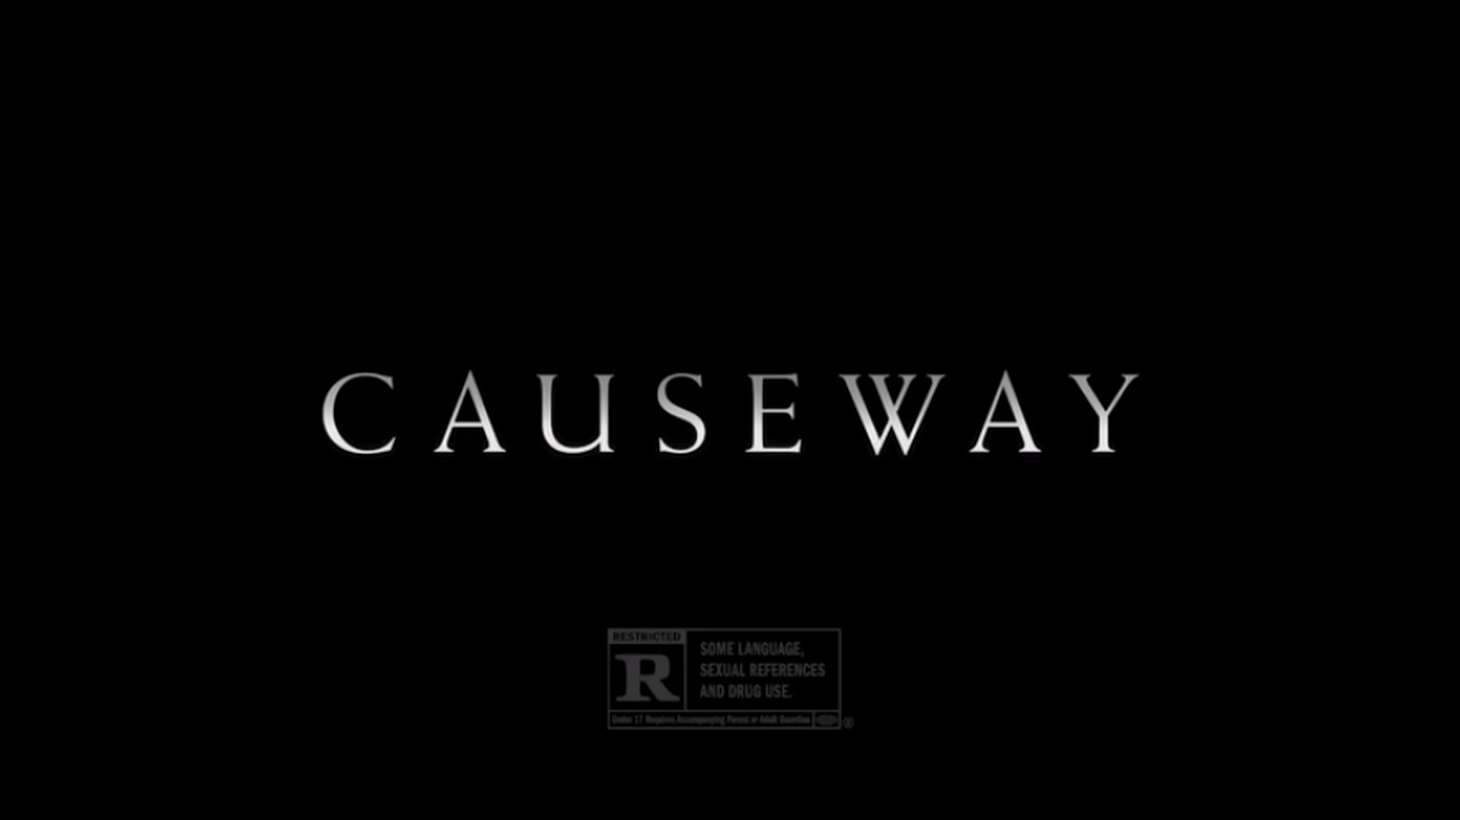 In “Causeway,” Brian Tyree Henry plays a driver in a crash that turned him into an amputee and killed his nephew, so he walks around with guilt, shame, and grief. Then he forms a life-changing friendship with a young veteran named Lynsey, played by Jennifer Lawrence.